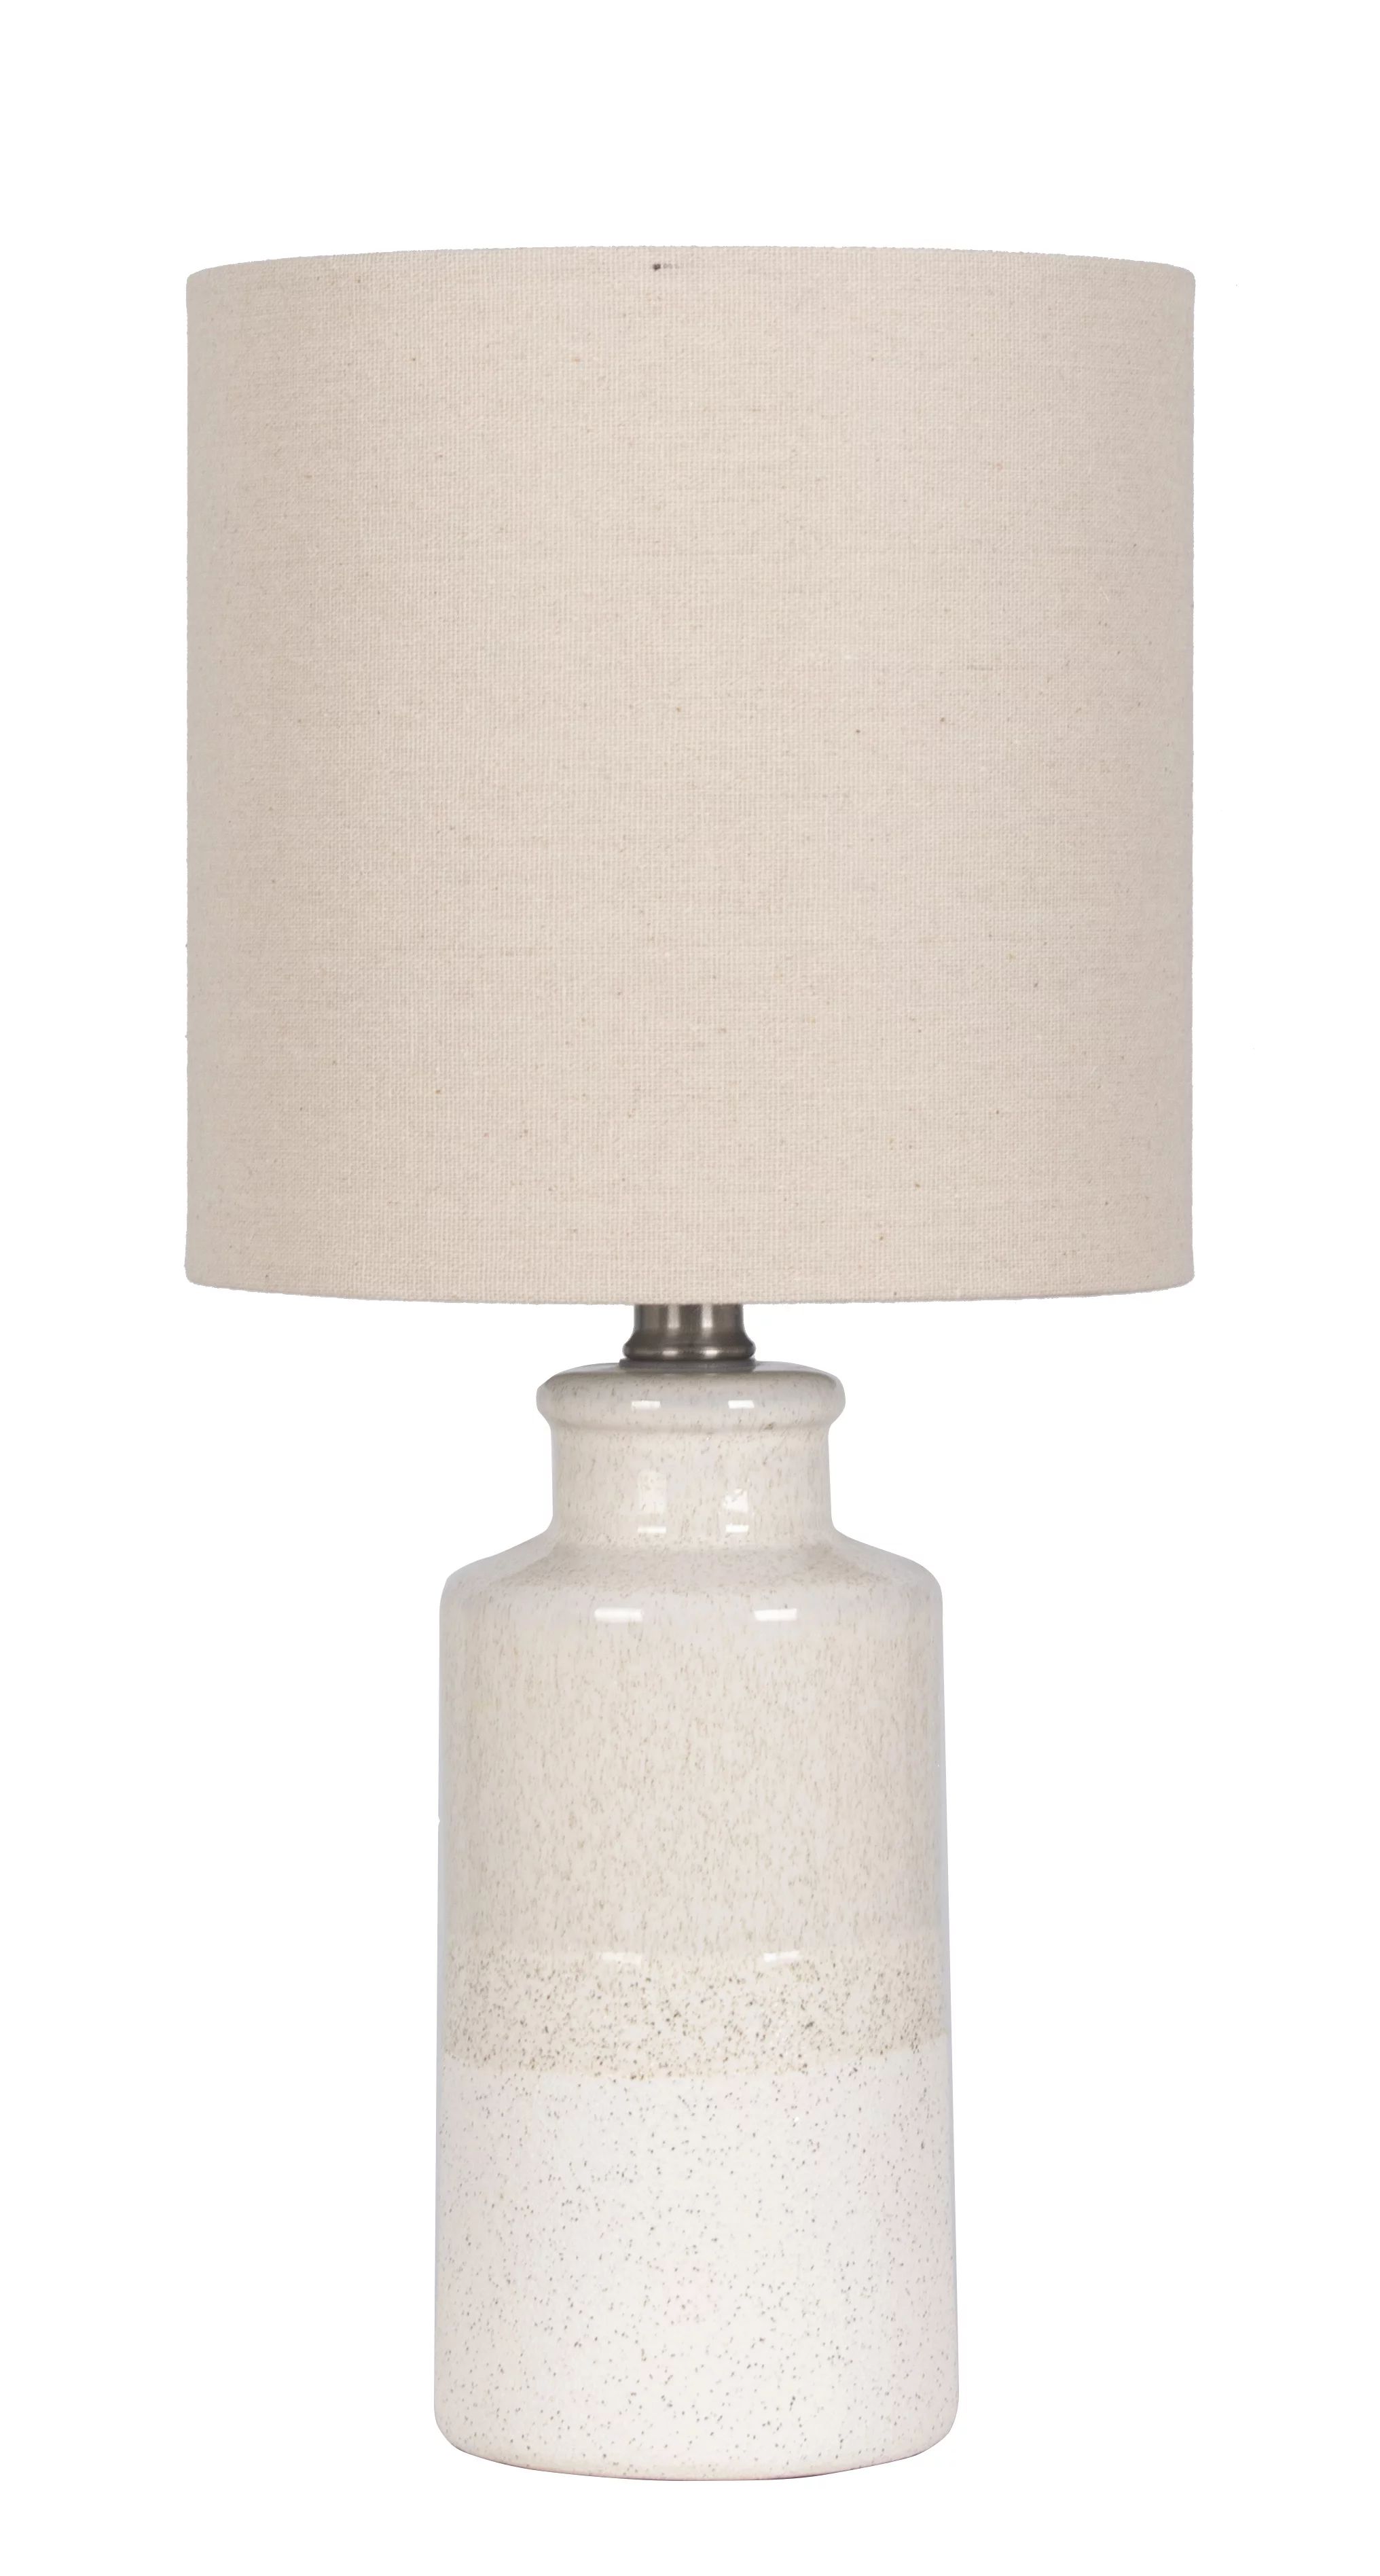 Mainstays 17" Reactive Glaze Ivory Textured Ceramic Table Lamp with LED Included | Walmart (US)